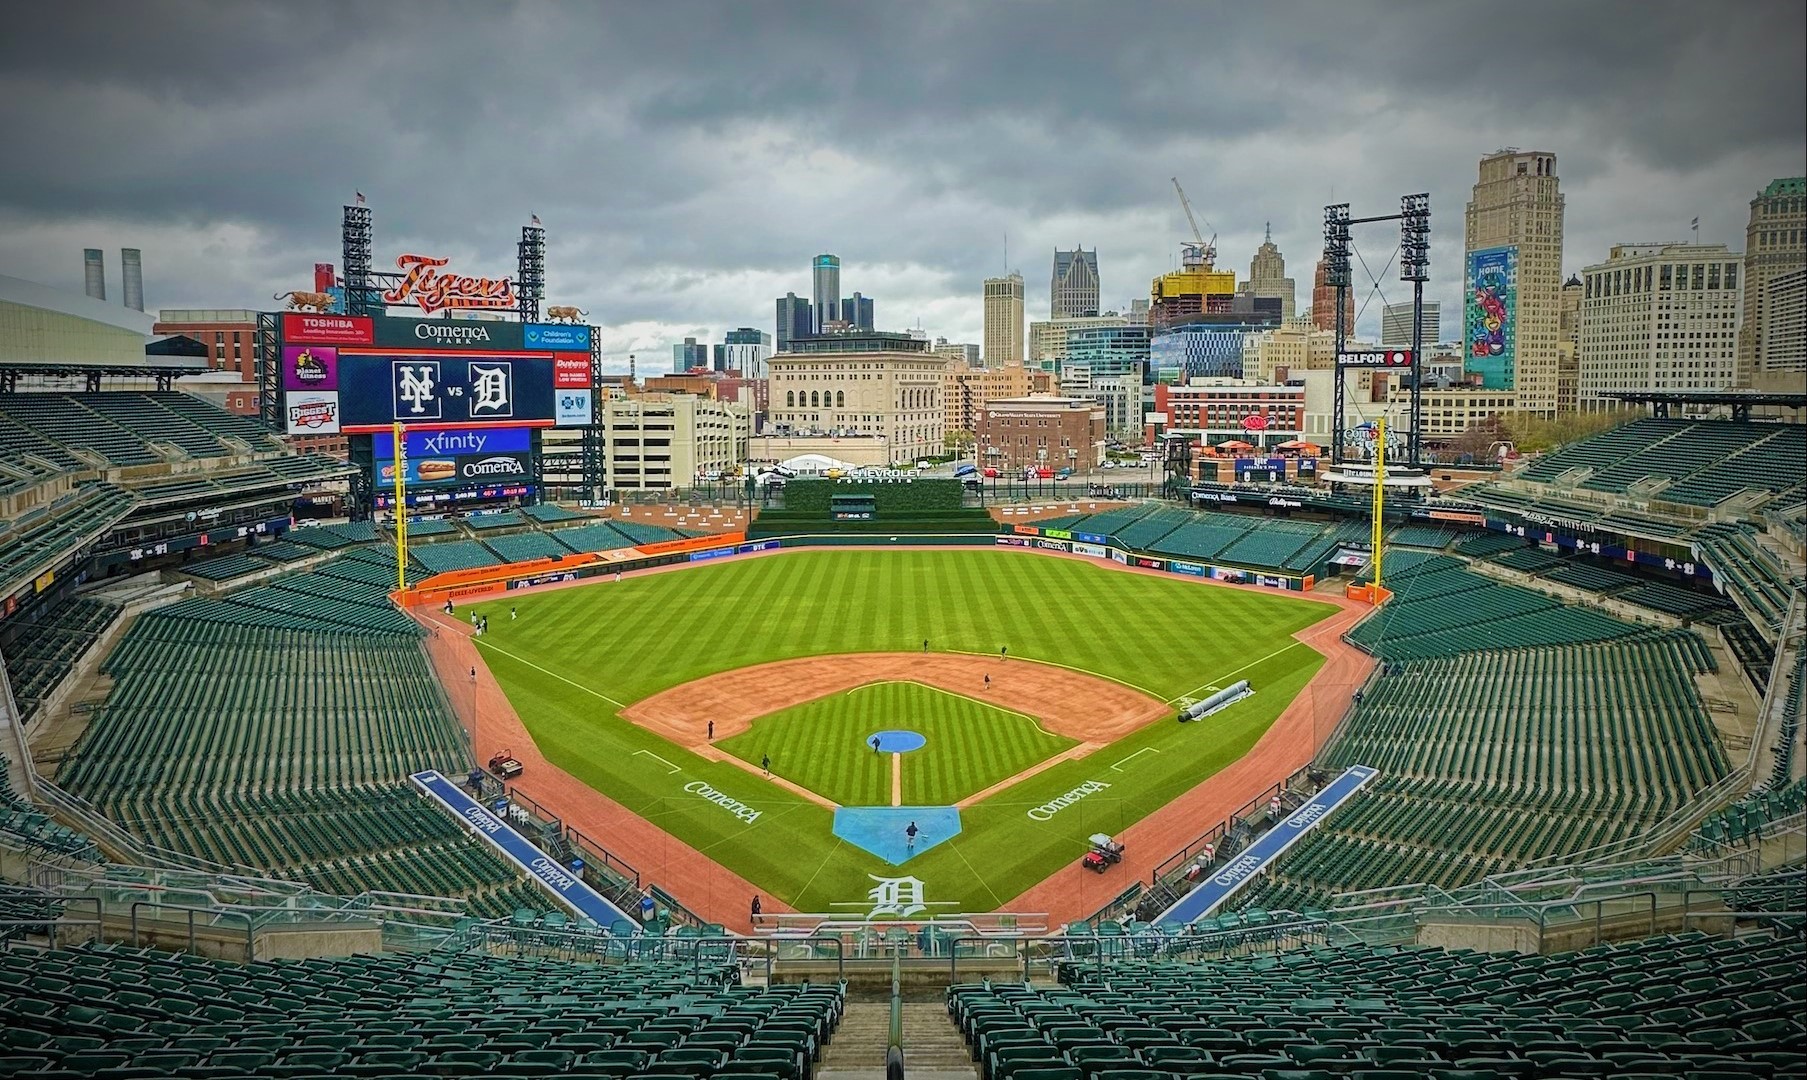 Ballparks Comerica Park - This Great Game